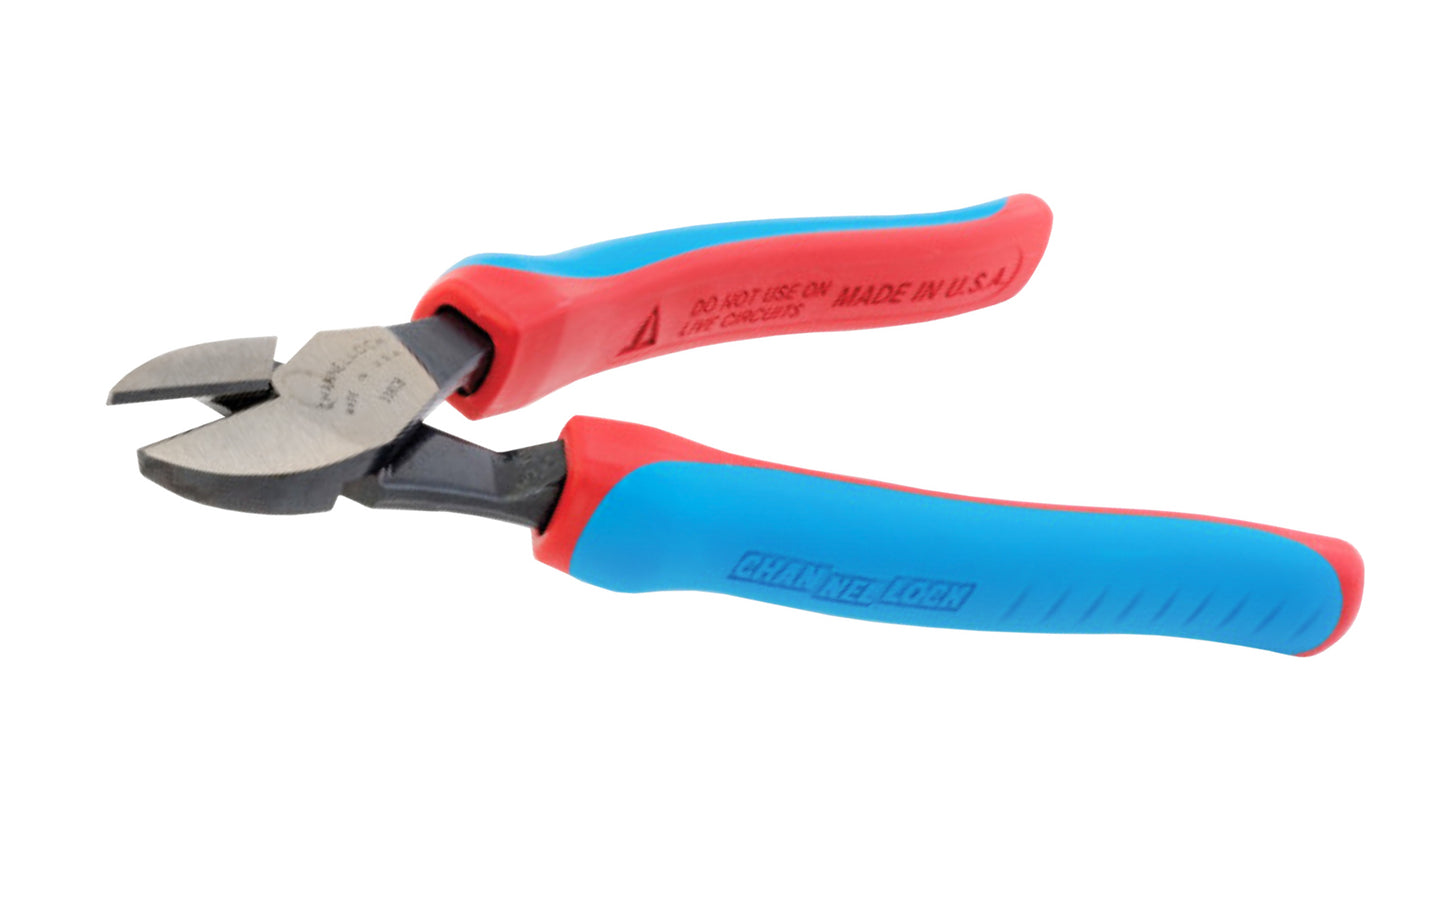 Channellock 8-1/4" Diagonal Cutting Pliers "Code Blue XLT". Model 338CB. Forged high carbon U.S. steel for maximum strength & durability is specially coated for rust prevention. Precision-machined knife & anvil style cutting edges ensure superior performance & longevity. Diagonal Cutters. Made in USA.